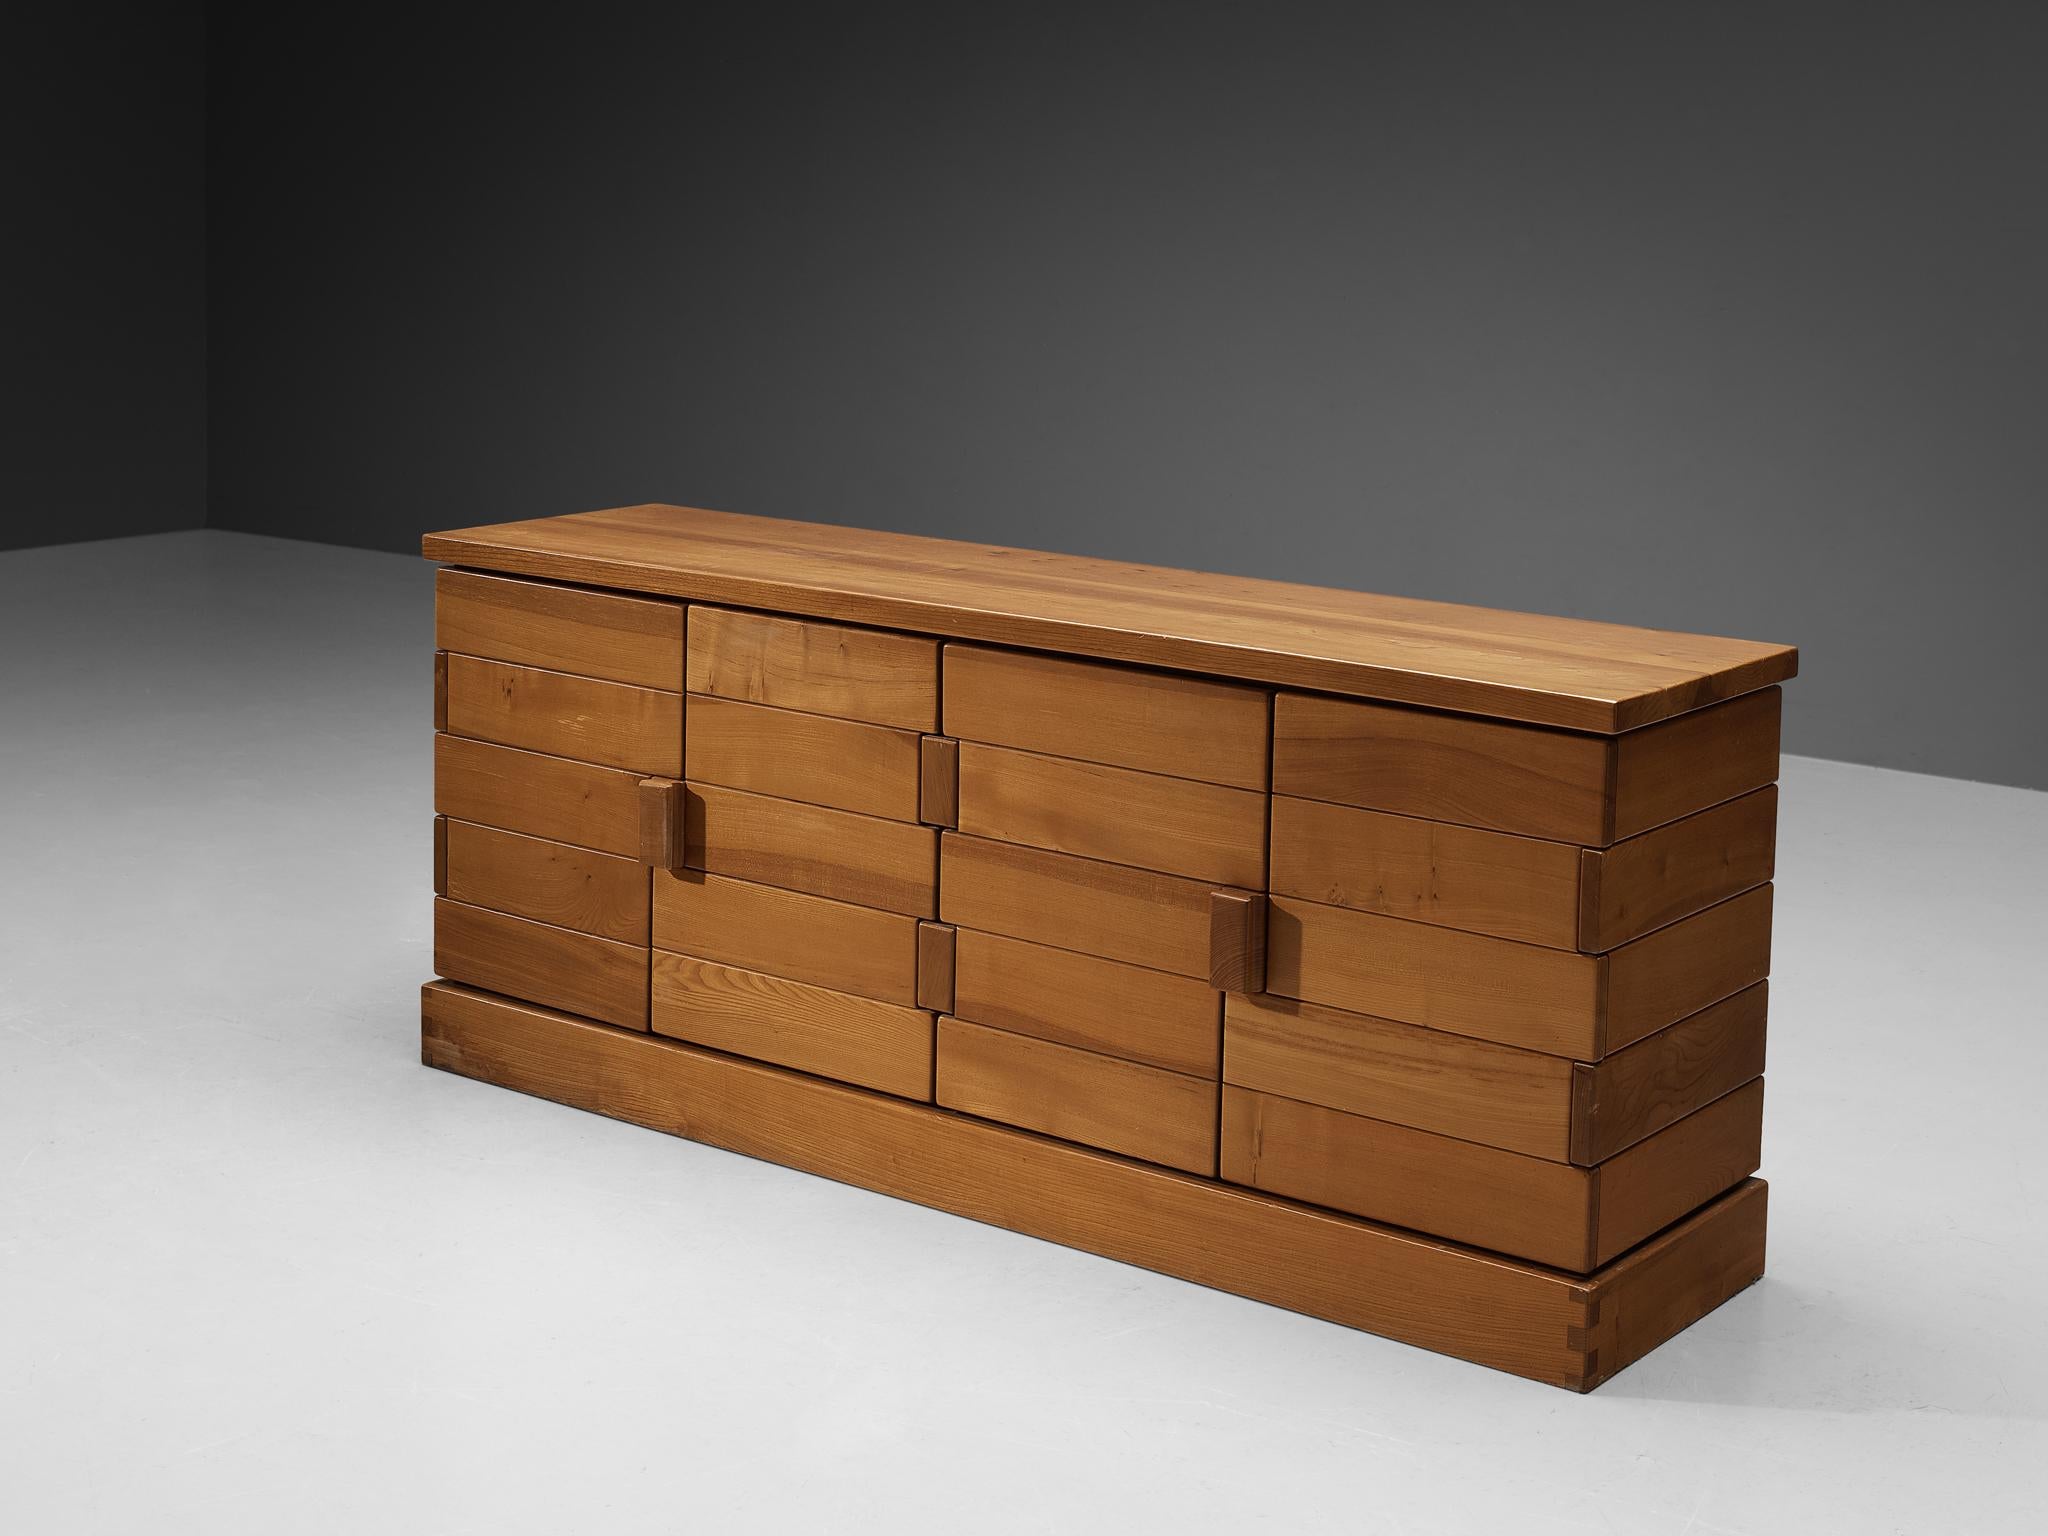 Maison Regain, sideboard, solid elm, metal, France, 1970s

This sideboard by Maison Regain has a strong decorative look. Horizontal slats in different lengths structure the front and are joined by two rectangular handles. The rhythmic doors give